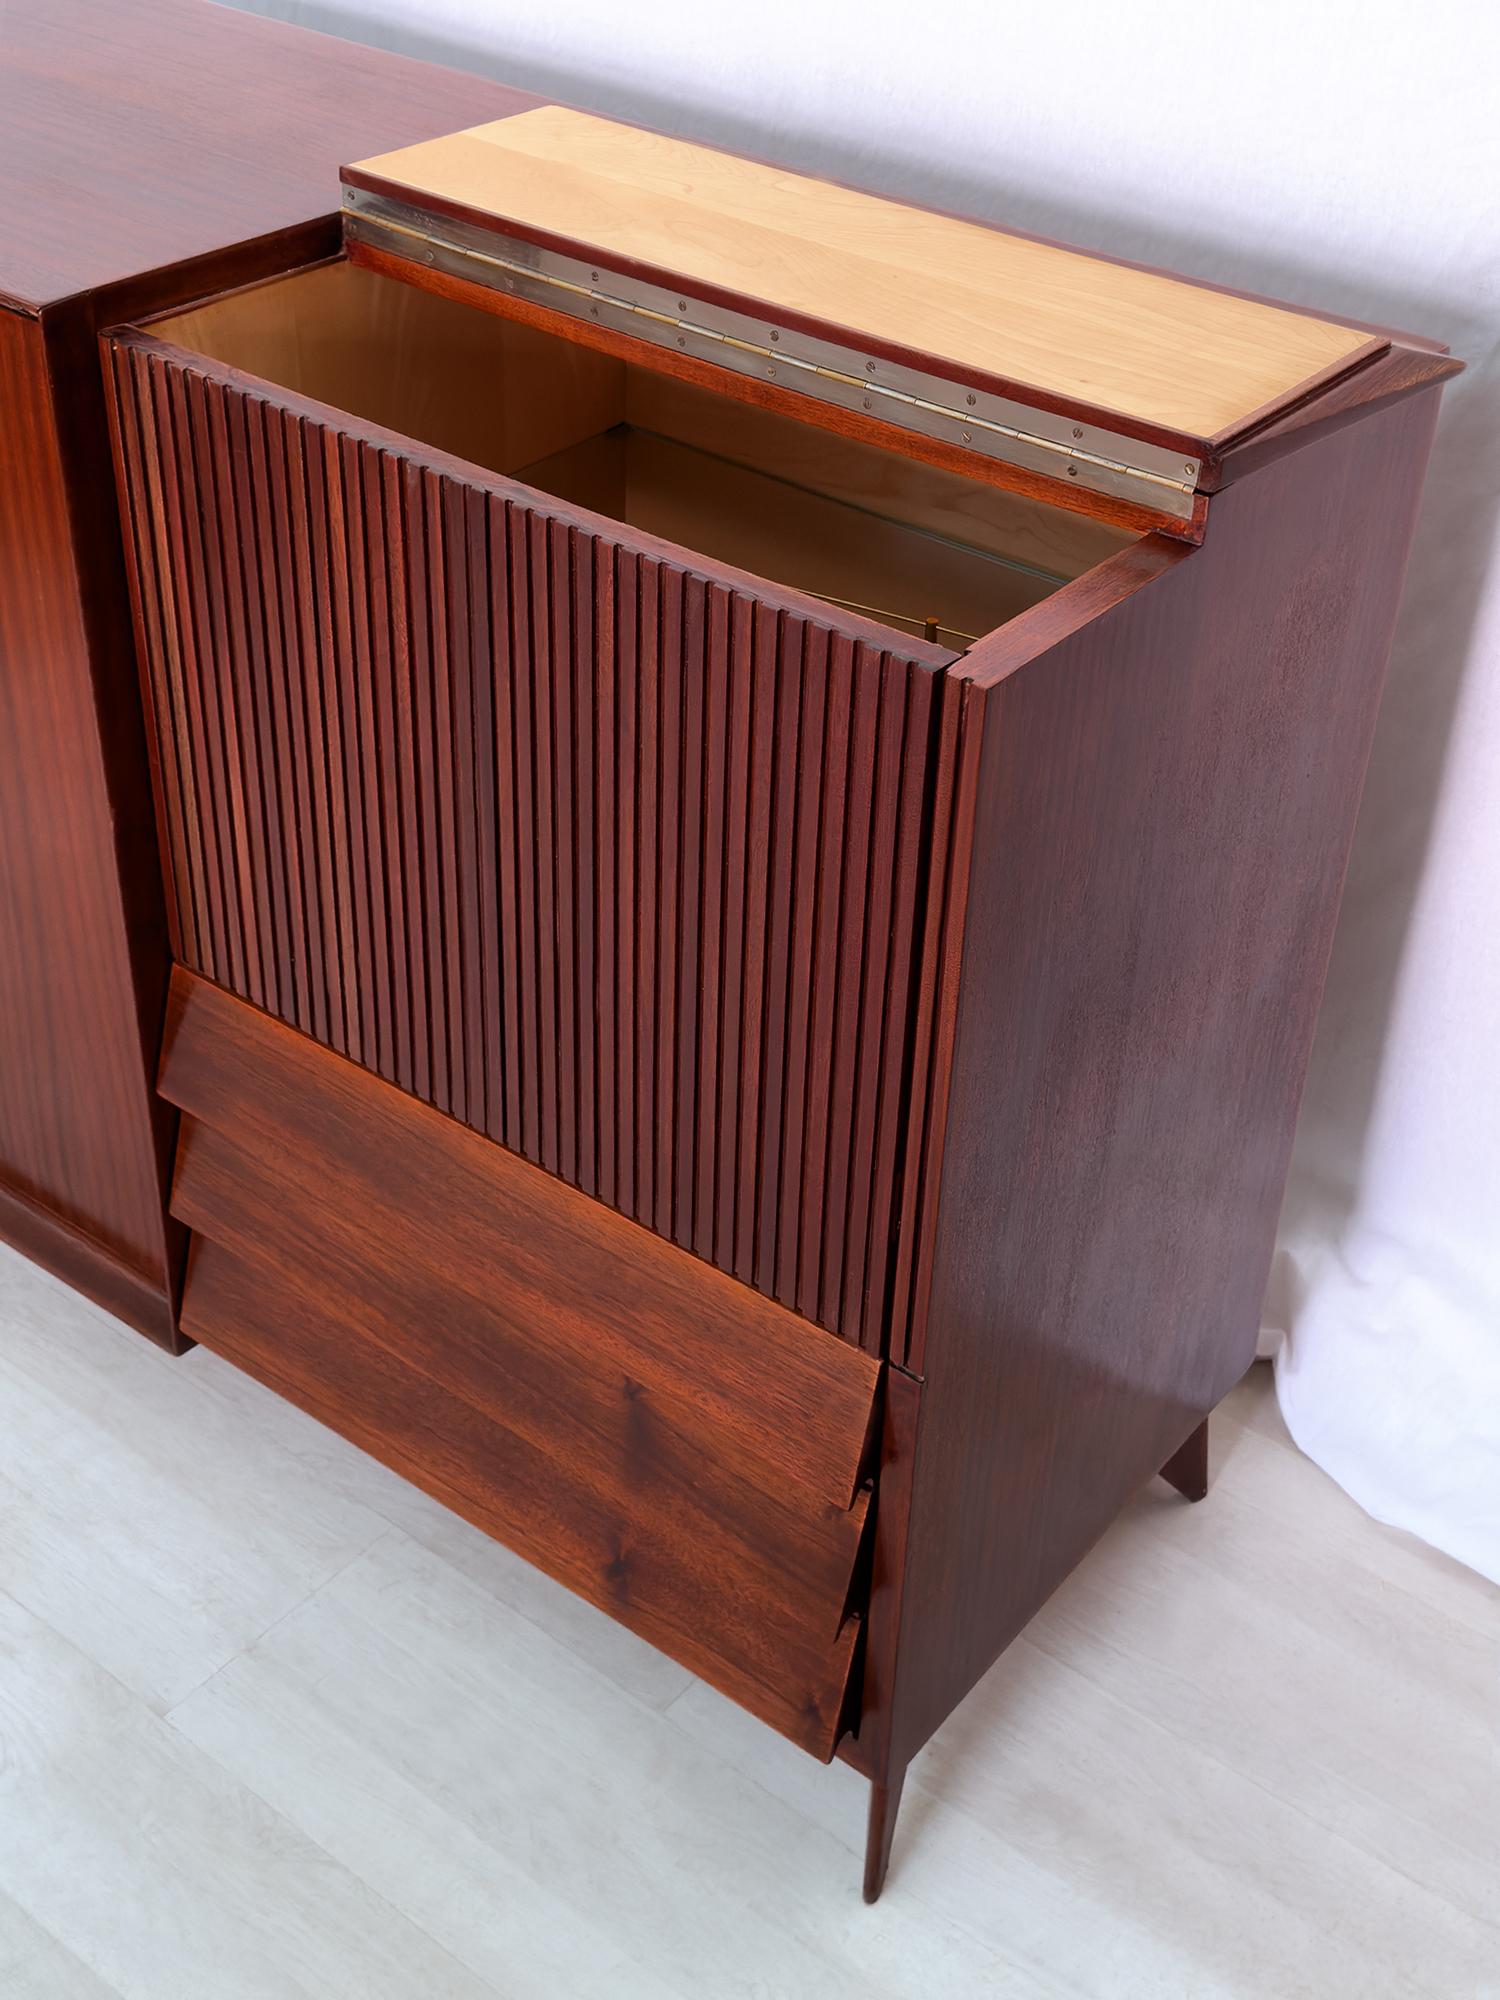 Italian Mid-Century Teak Wood Sideboard with Bar Cabinet by Vittorio Dassi, 1950s For Sale 8